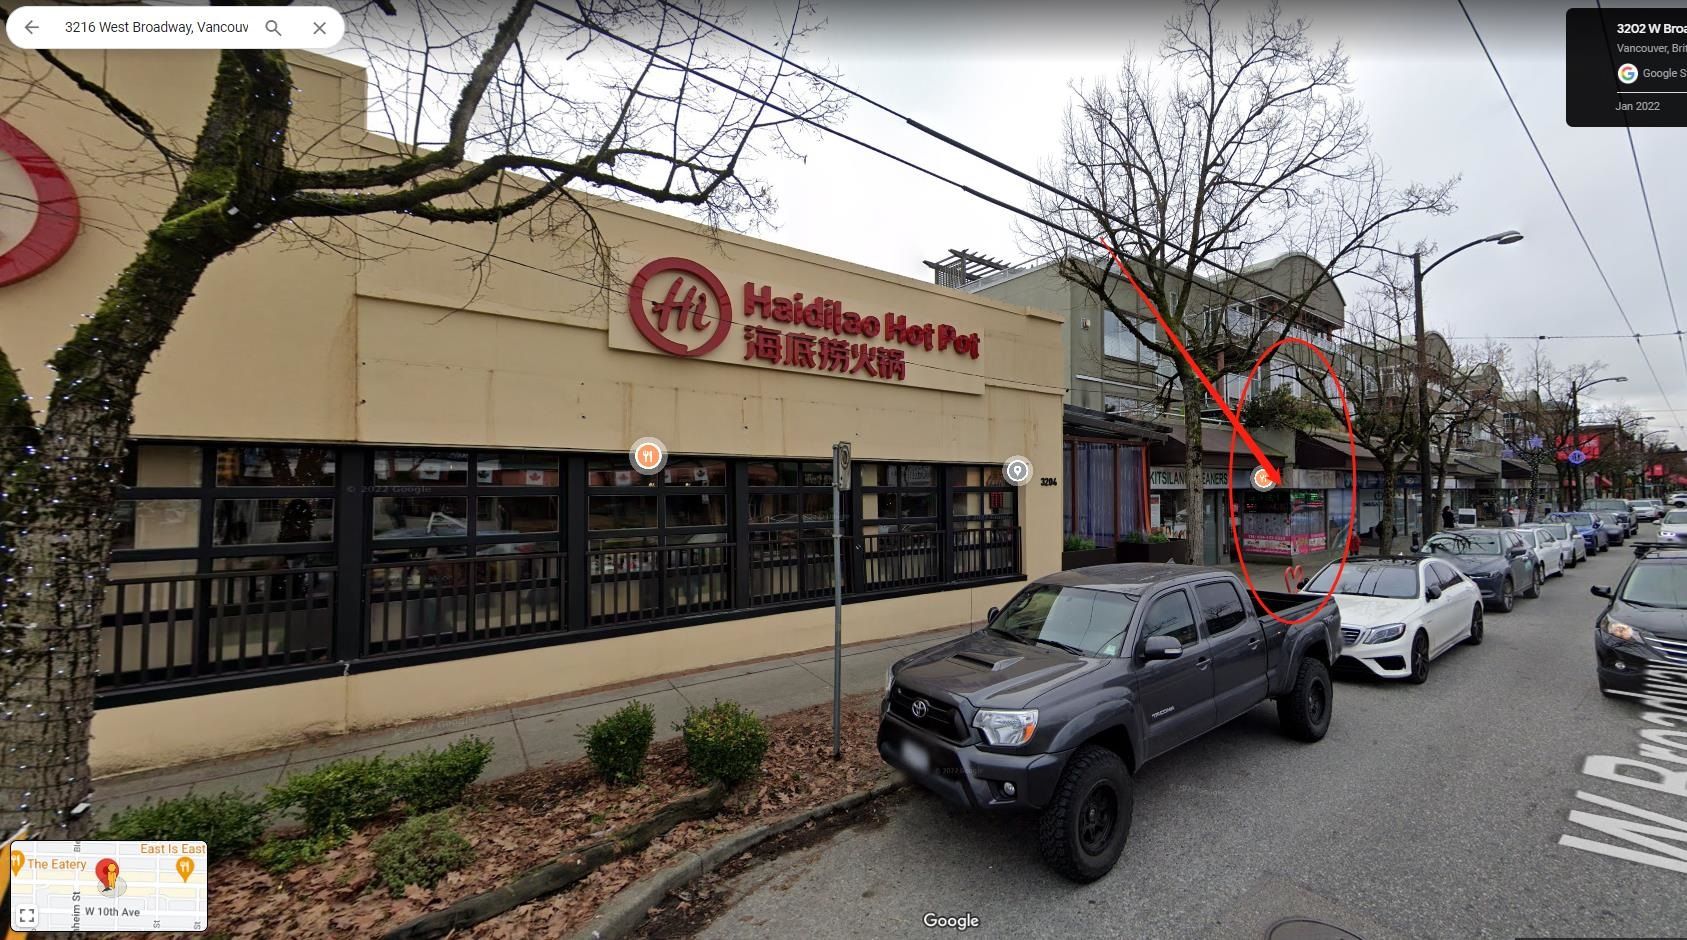 Main Photo: 3216 W BROADWAY in Vancouver: Kitsilano Retail for sale (Vancouver West)  : MLS®# C8054015